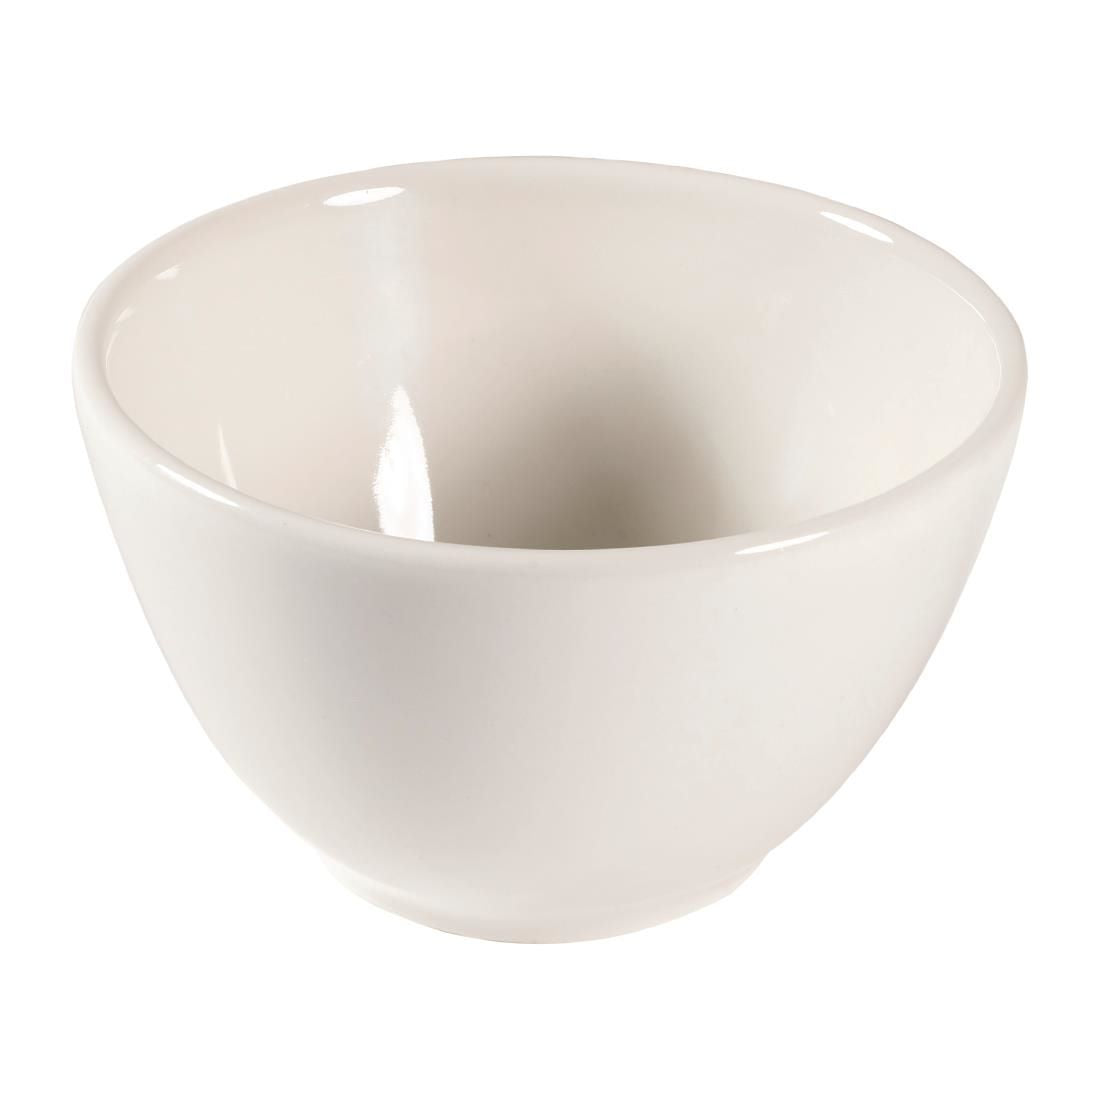 FA695 Churchill Profile Deep Bowls White 8.4oz 102mm (Pack of 12) JD Catering Equipment Solutions Ltd